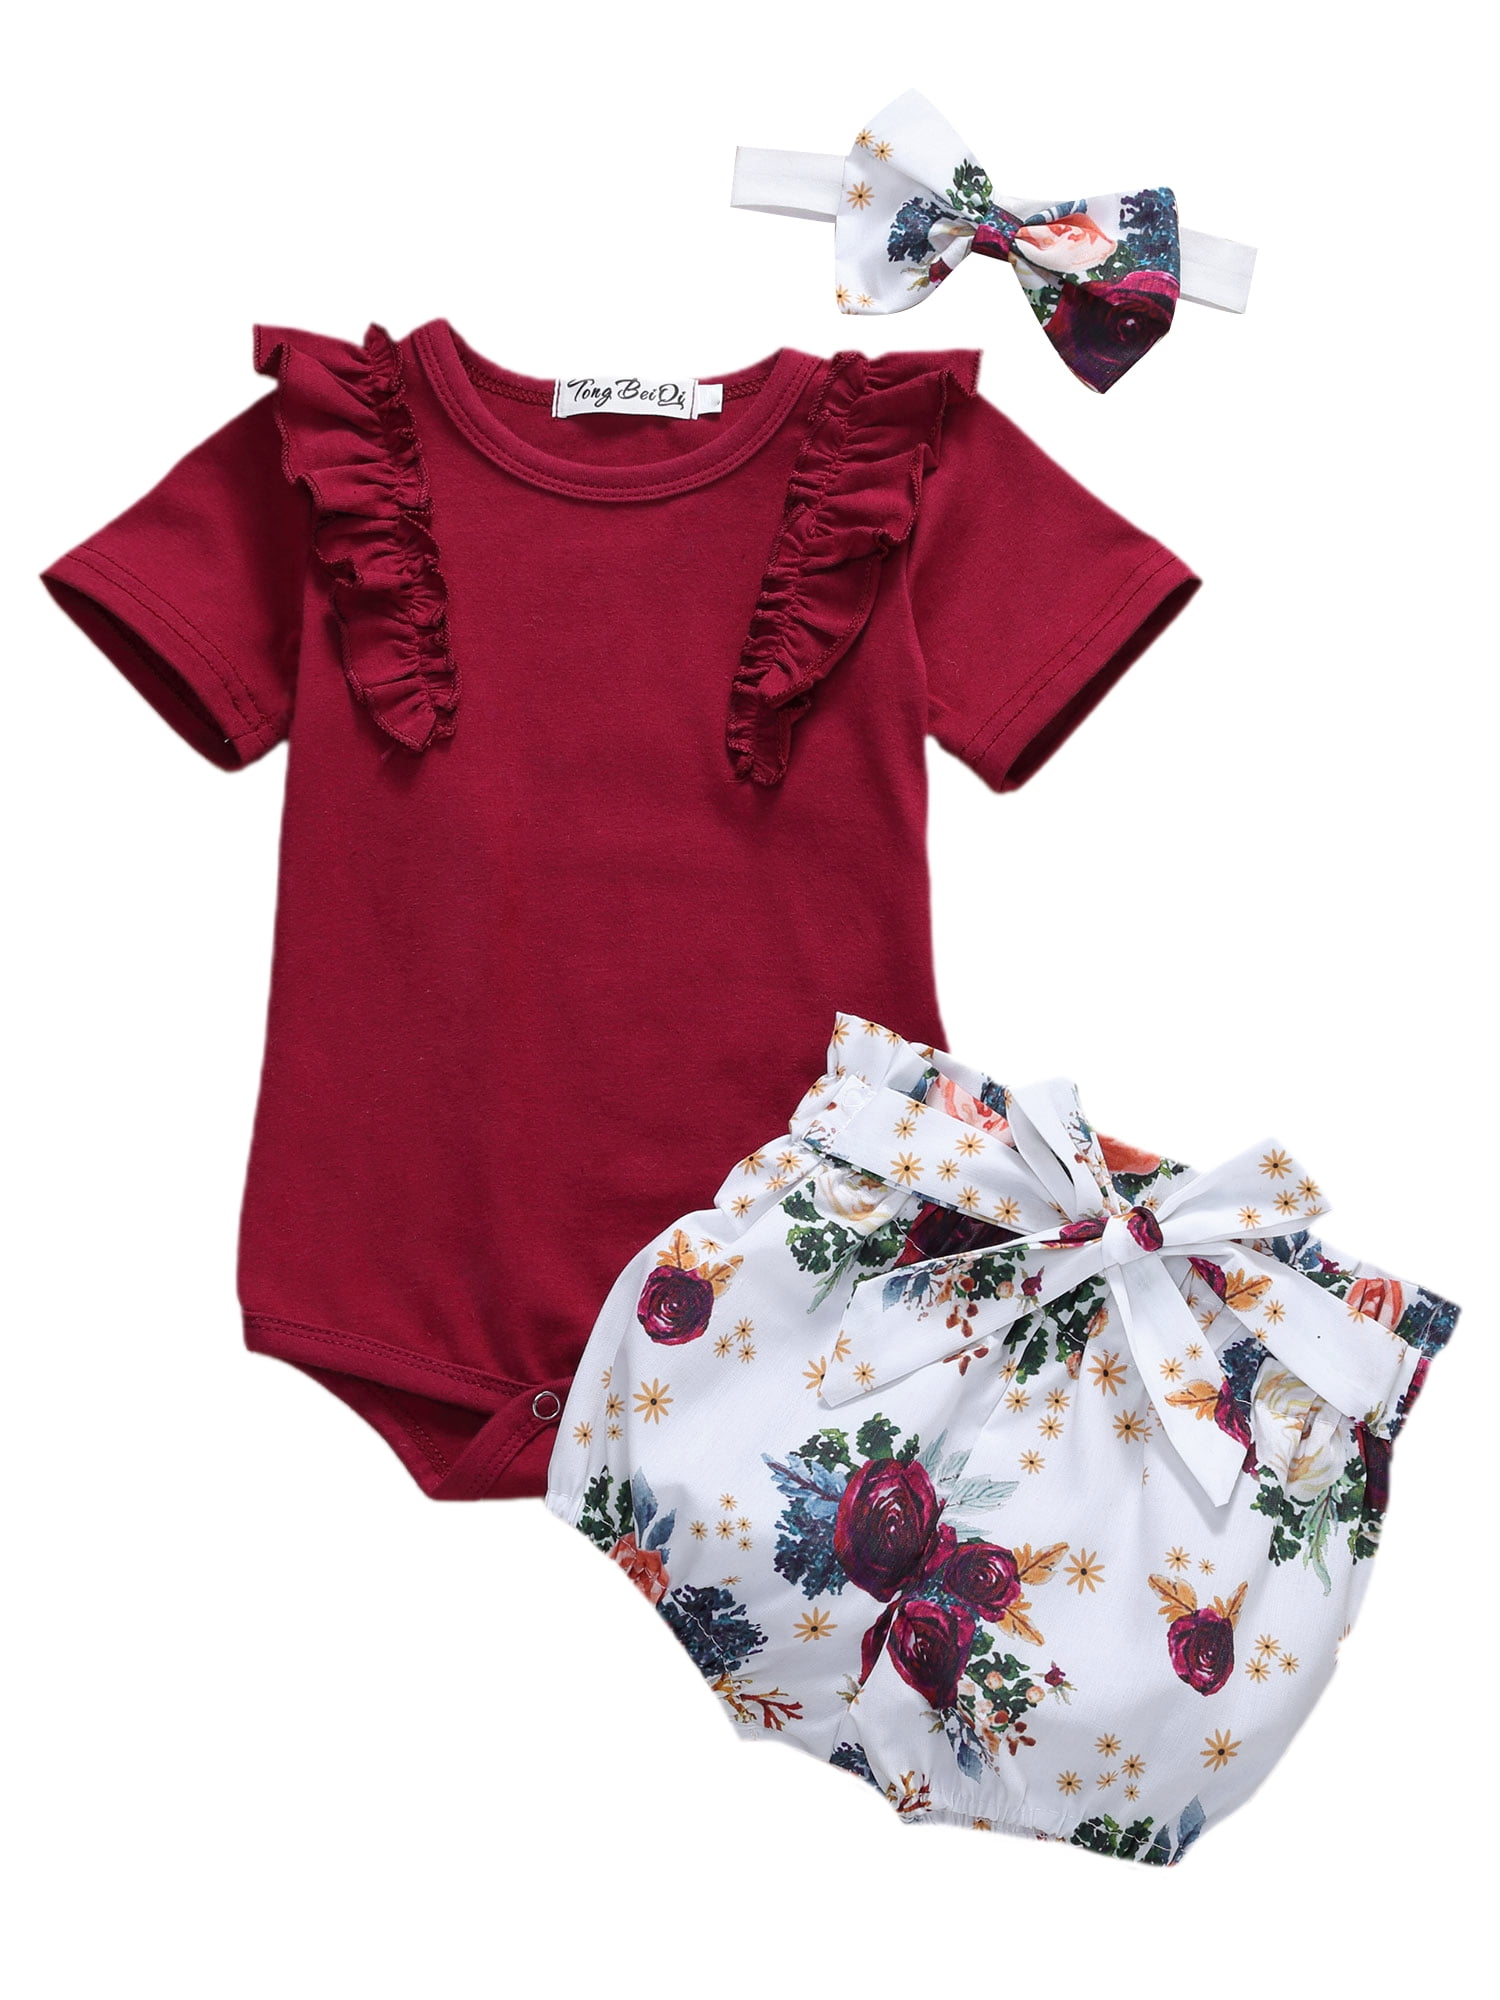 Toddler Baby Girls Long/Short Sleeves Romper+Floral Pants+Headbands Set Outfits 